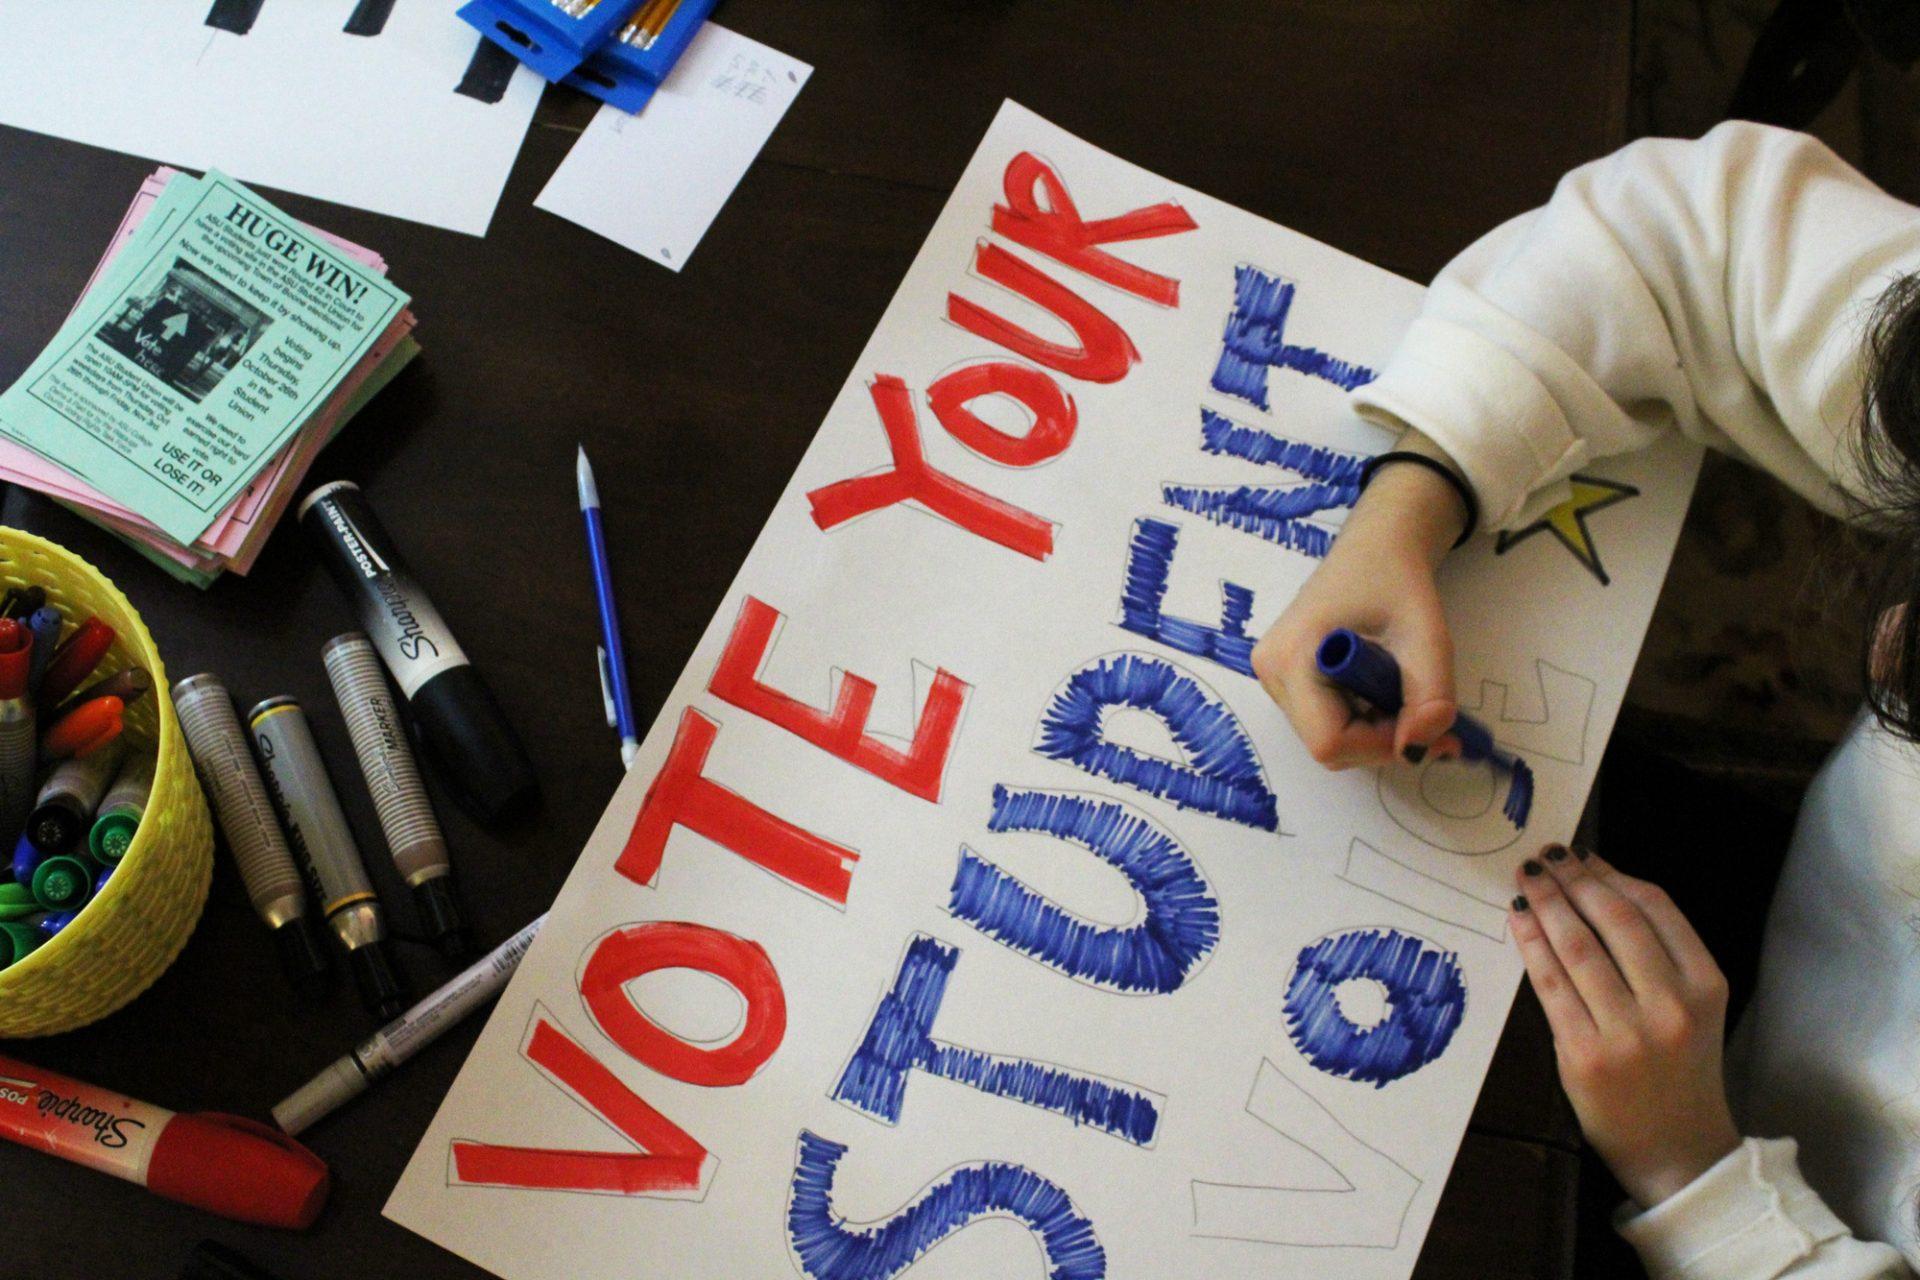 Amanda Lago, a sophomore anthropology major and member of the Watauga County Democratic Party, making a sign to celebrate securing an on-campus voting site for App State students at the partys headquarters on Oct. 25. After a battle in the courts, App students were granted a polling place for the municipal election on Oct. 25. 